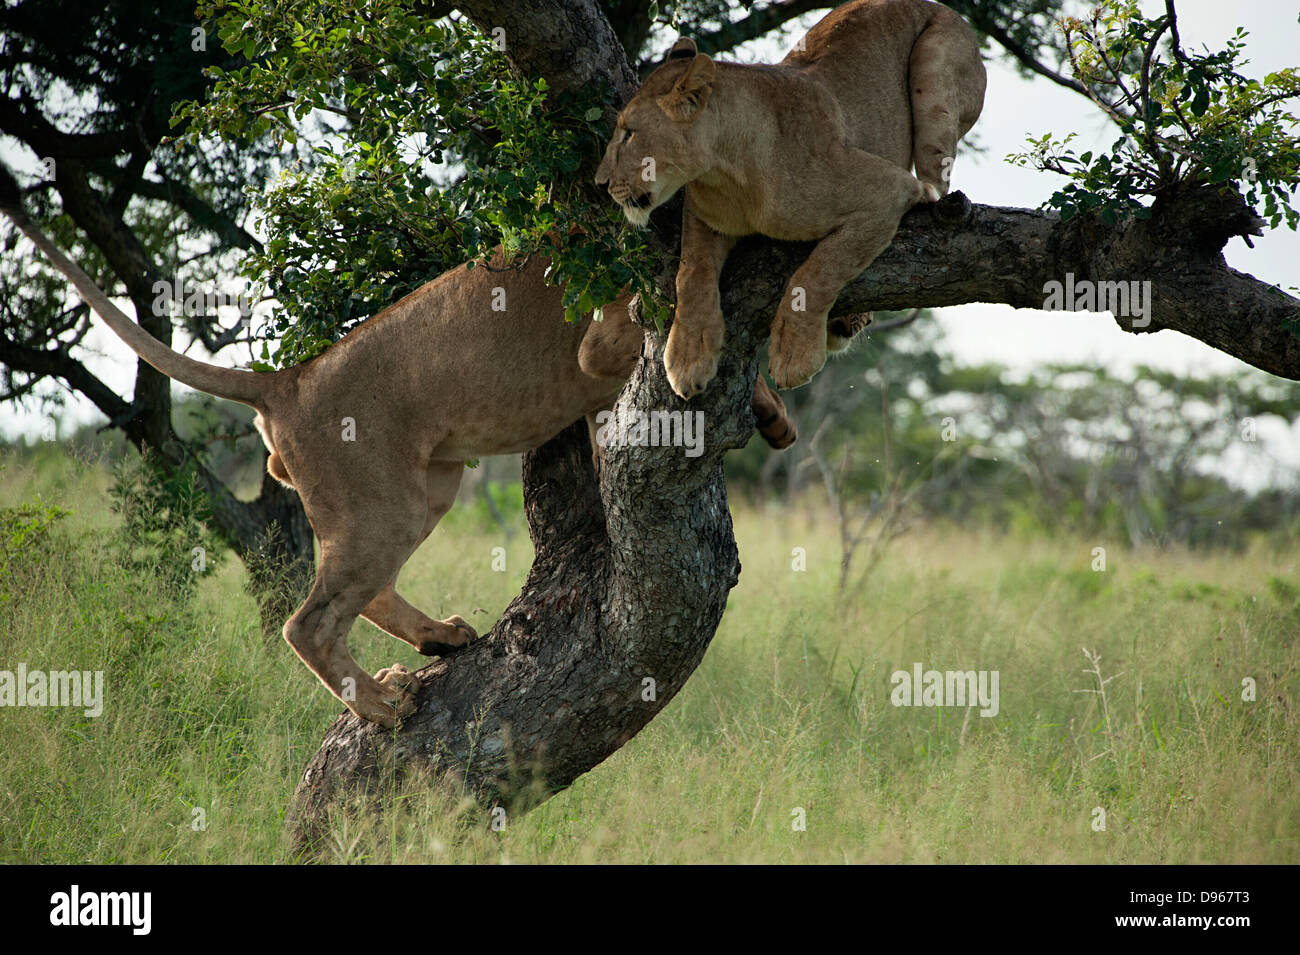 Lions in tree surveying game reserve. South Africa. Stock Photo